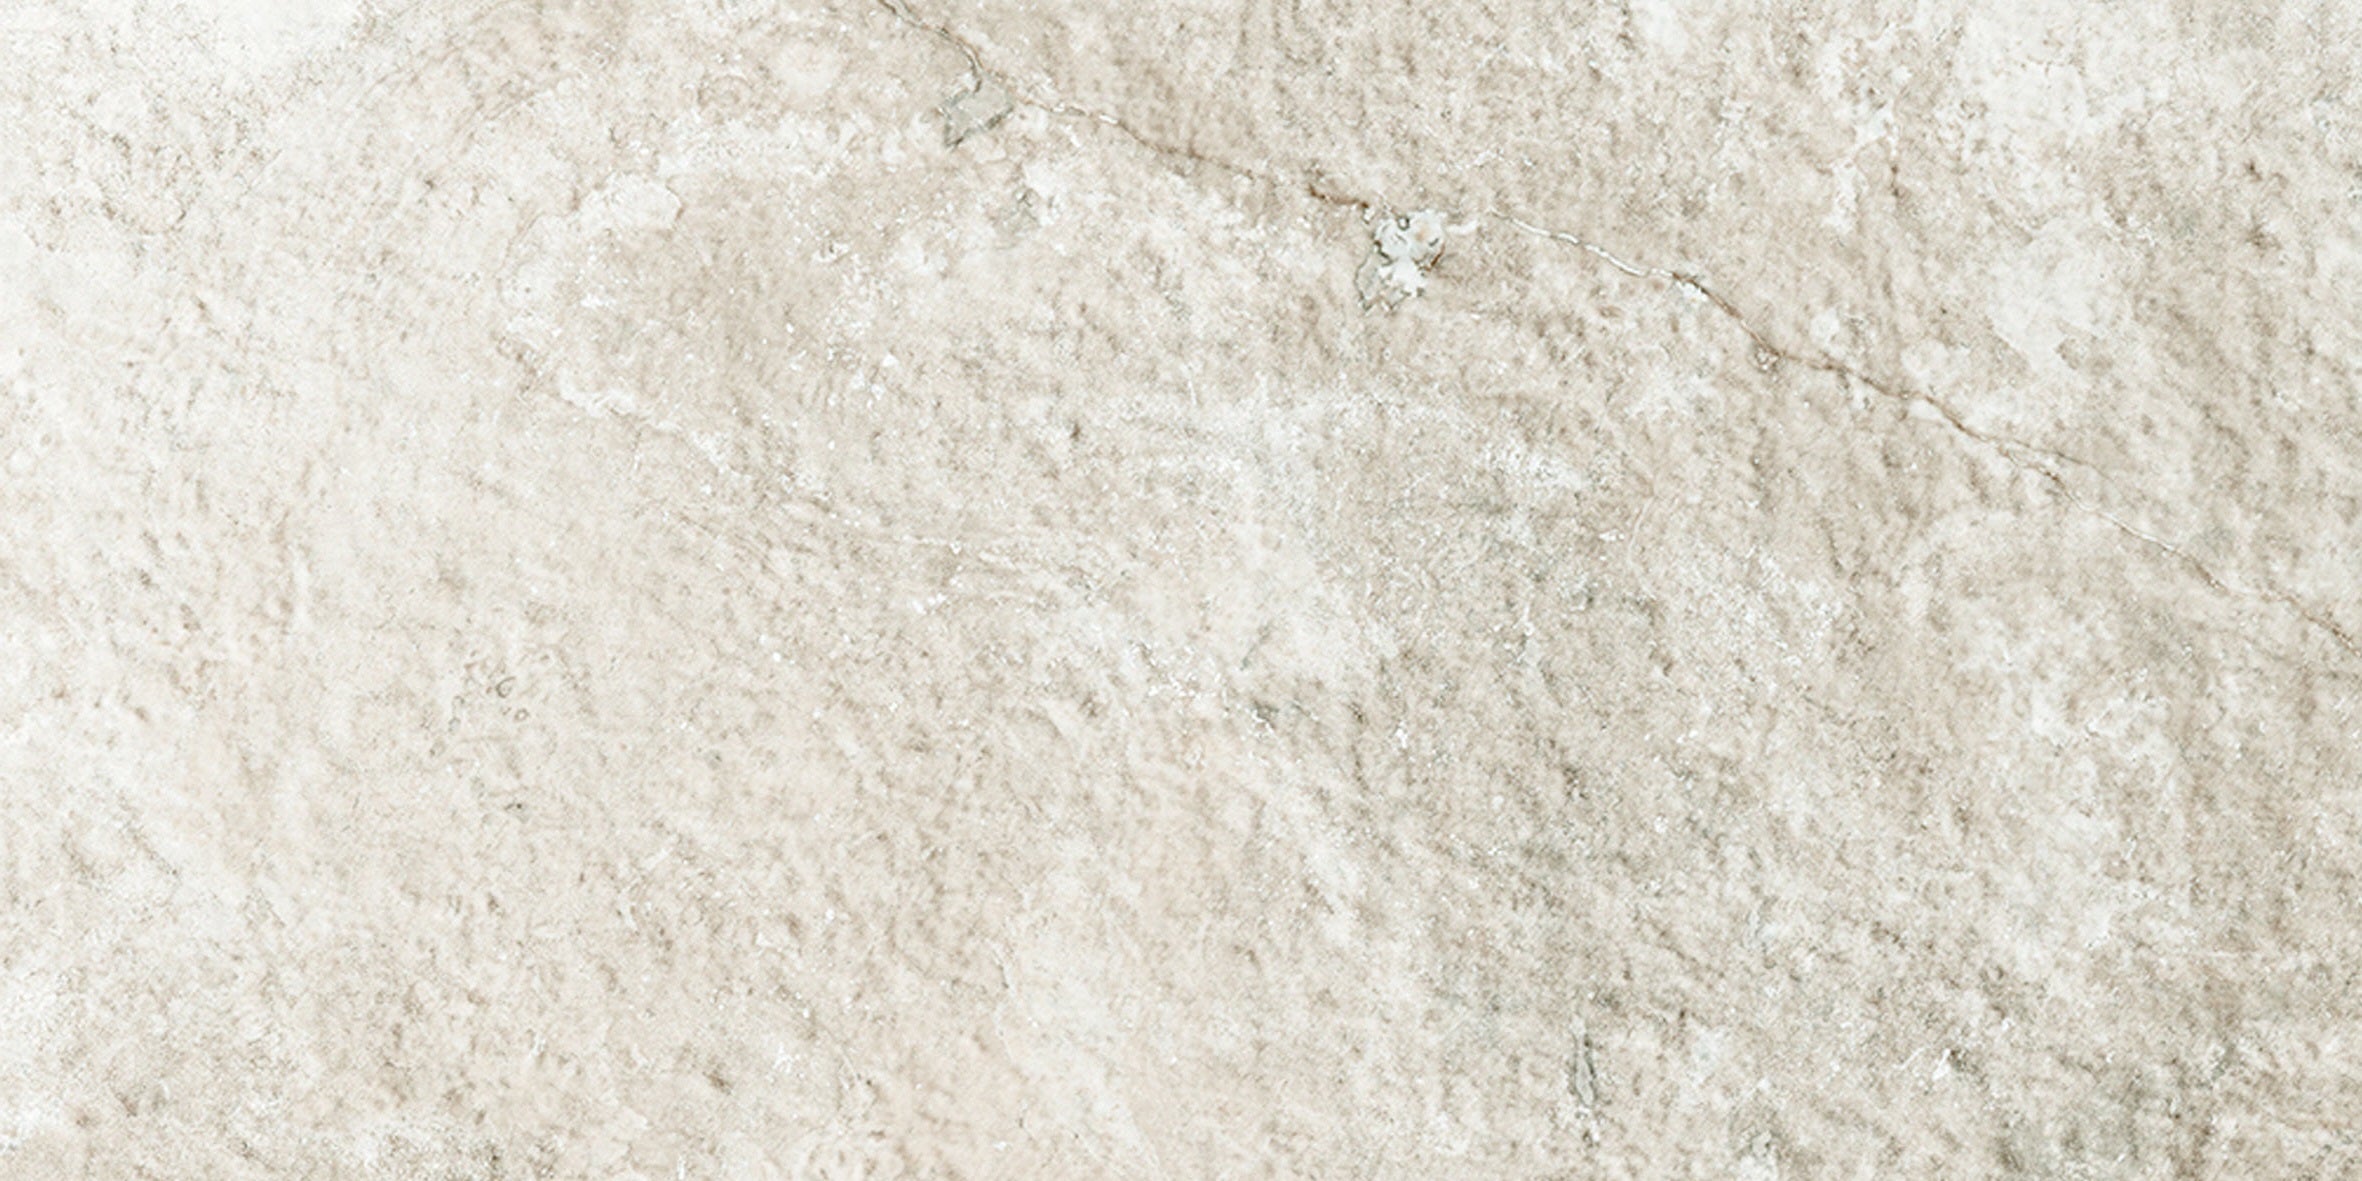 landmark frontier20 travertine cross cut white paver tile 12x24x20mm matte rectified porcelain tile distributed by surface group international